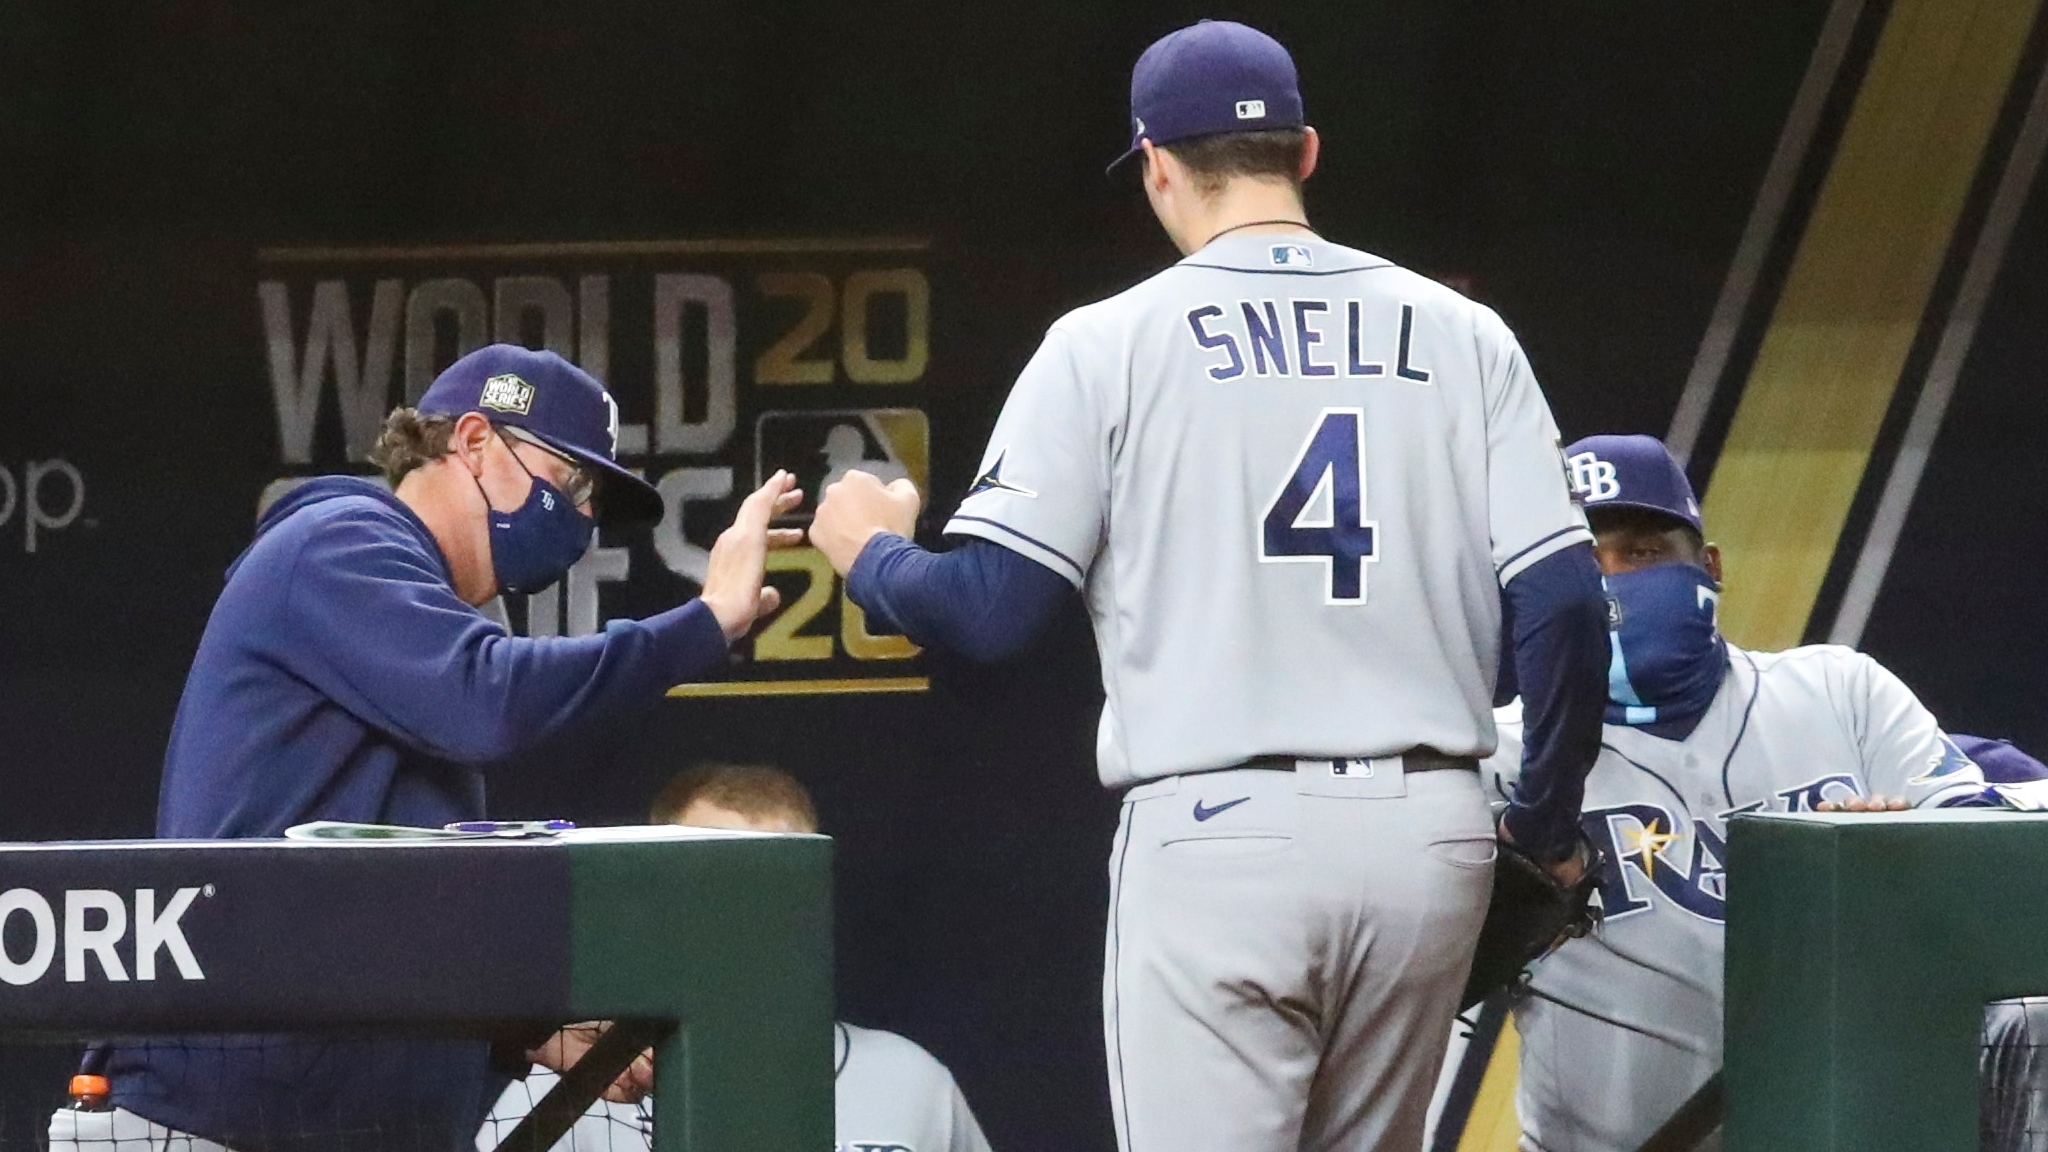 Sorry, Rays, but trading Blake Snell is not how defending champs behave